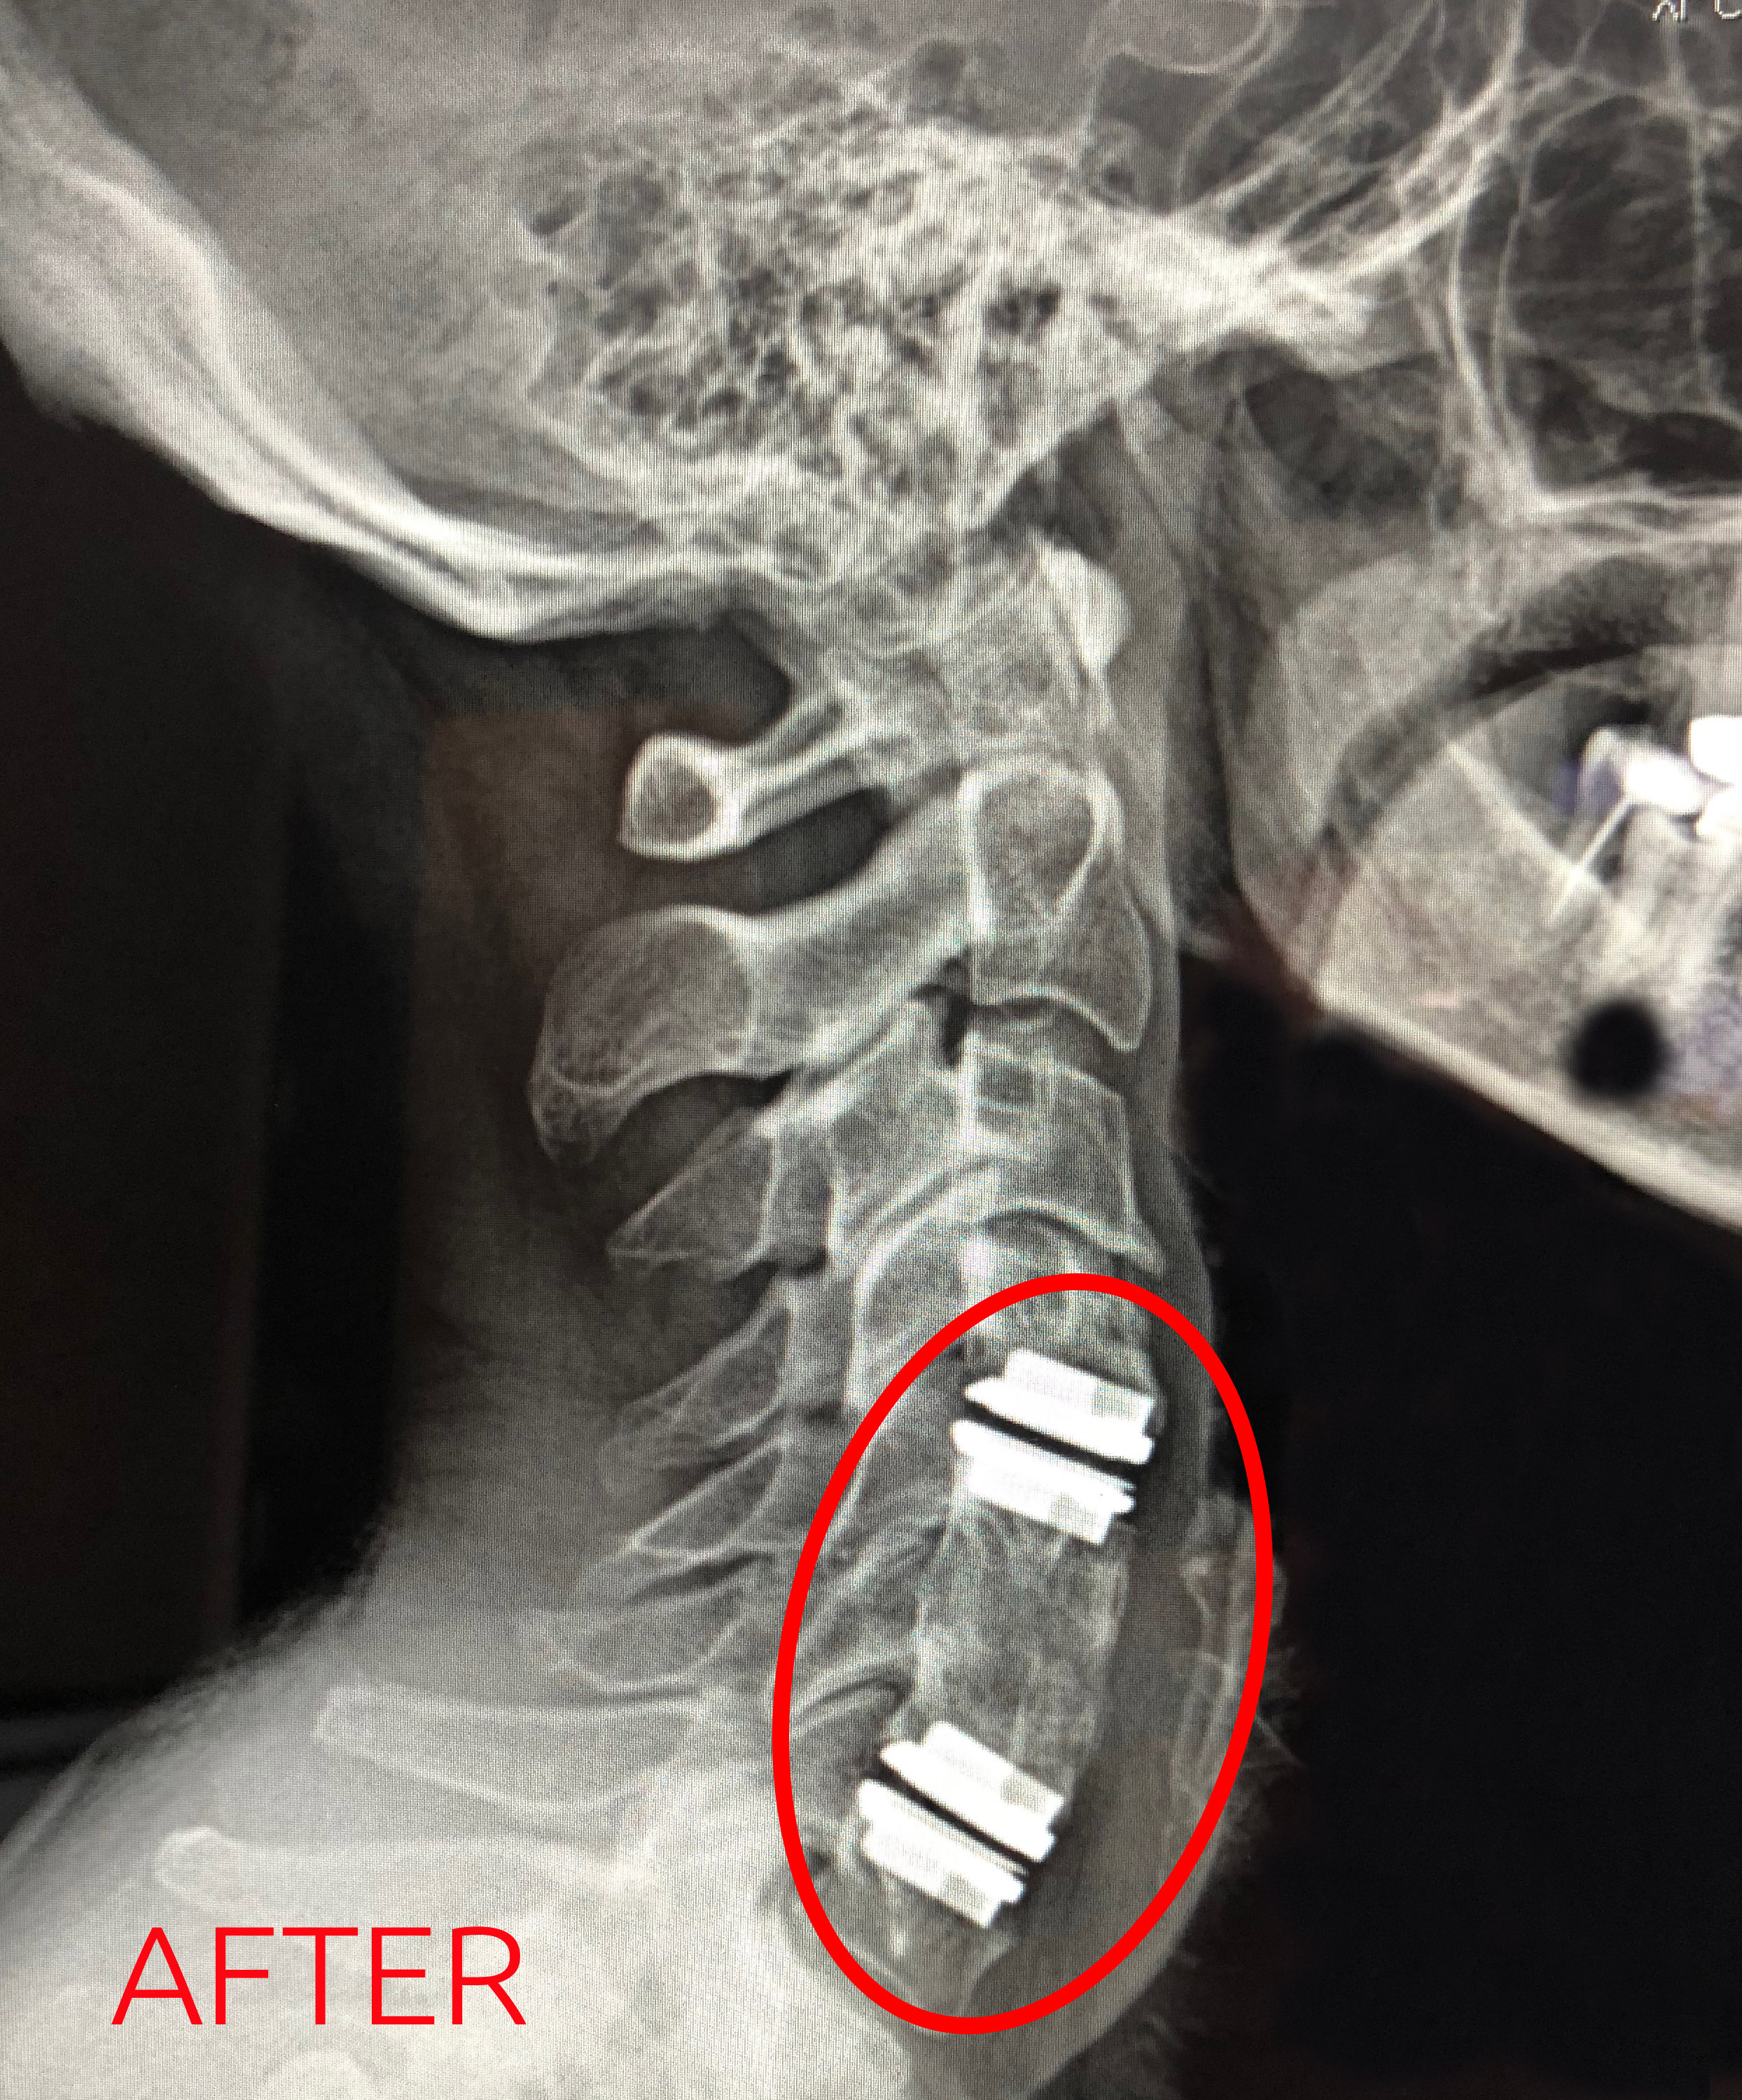 Andrea Leigh Logan's X-Ray After Surgery